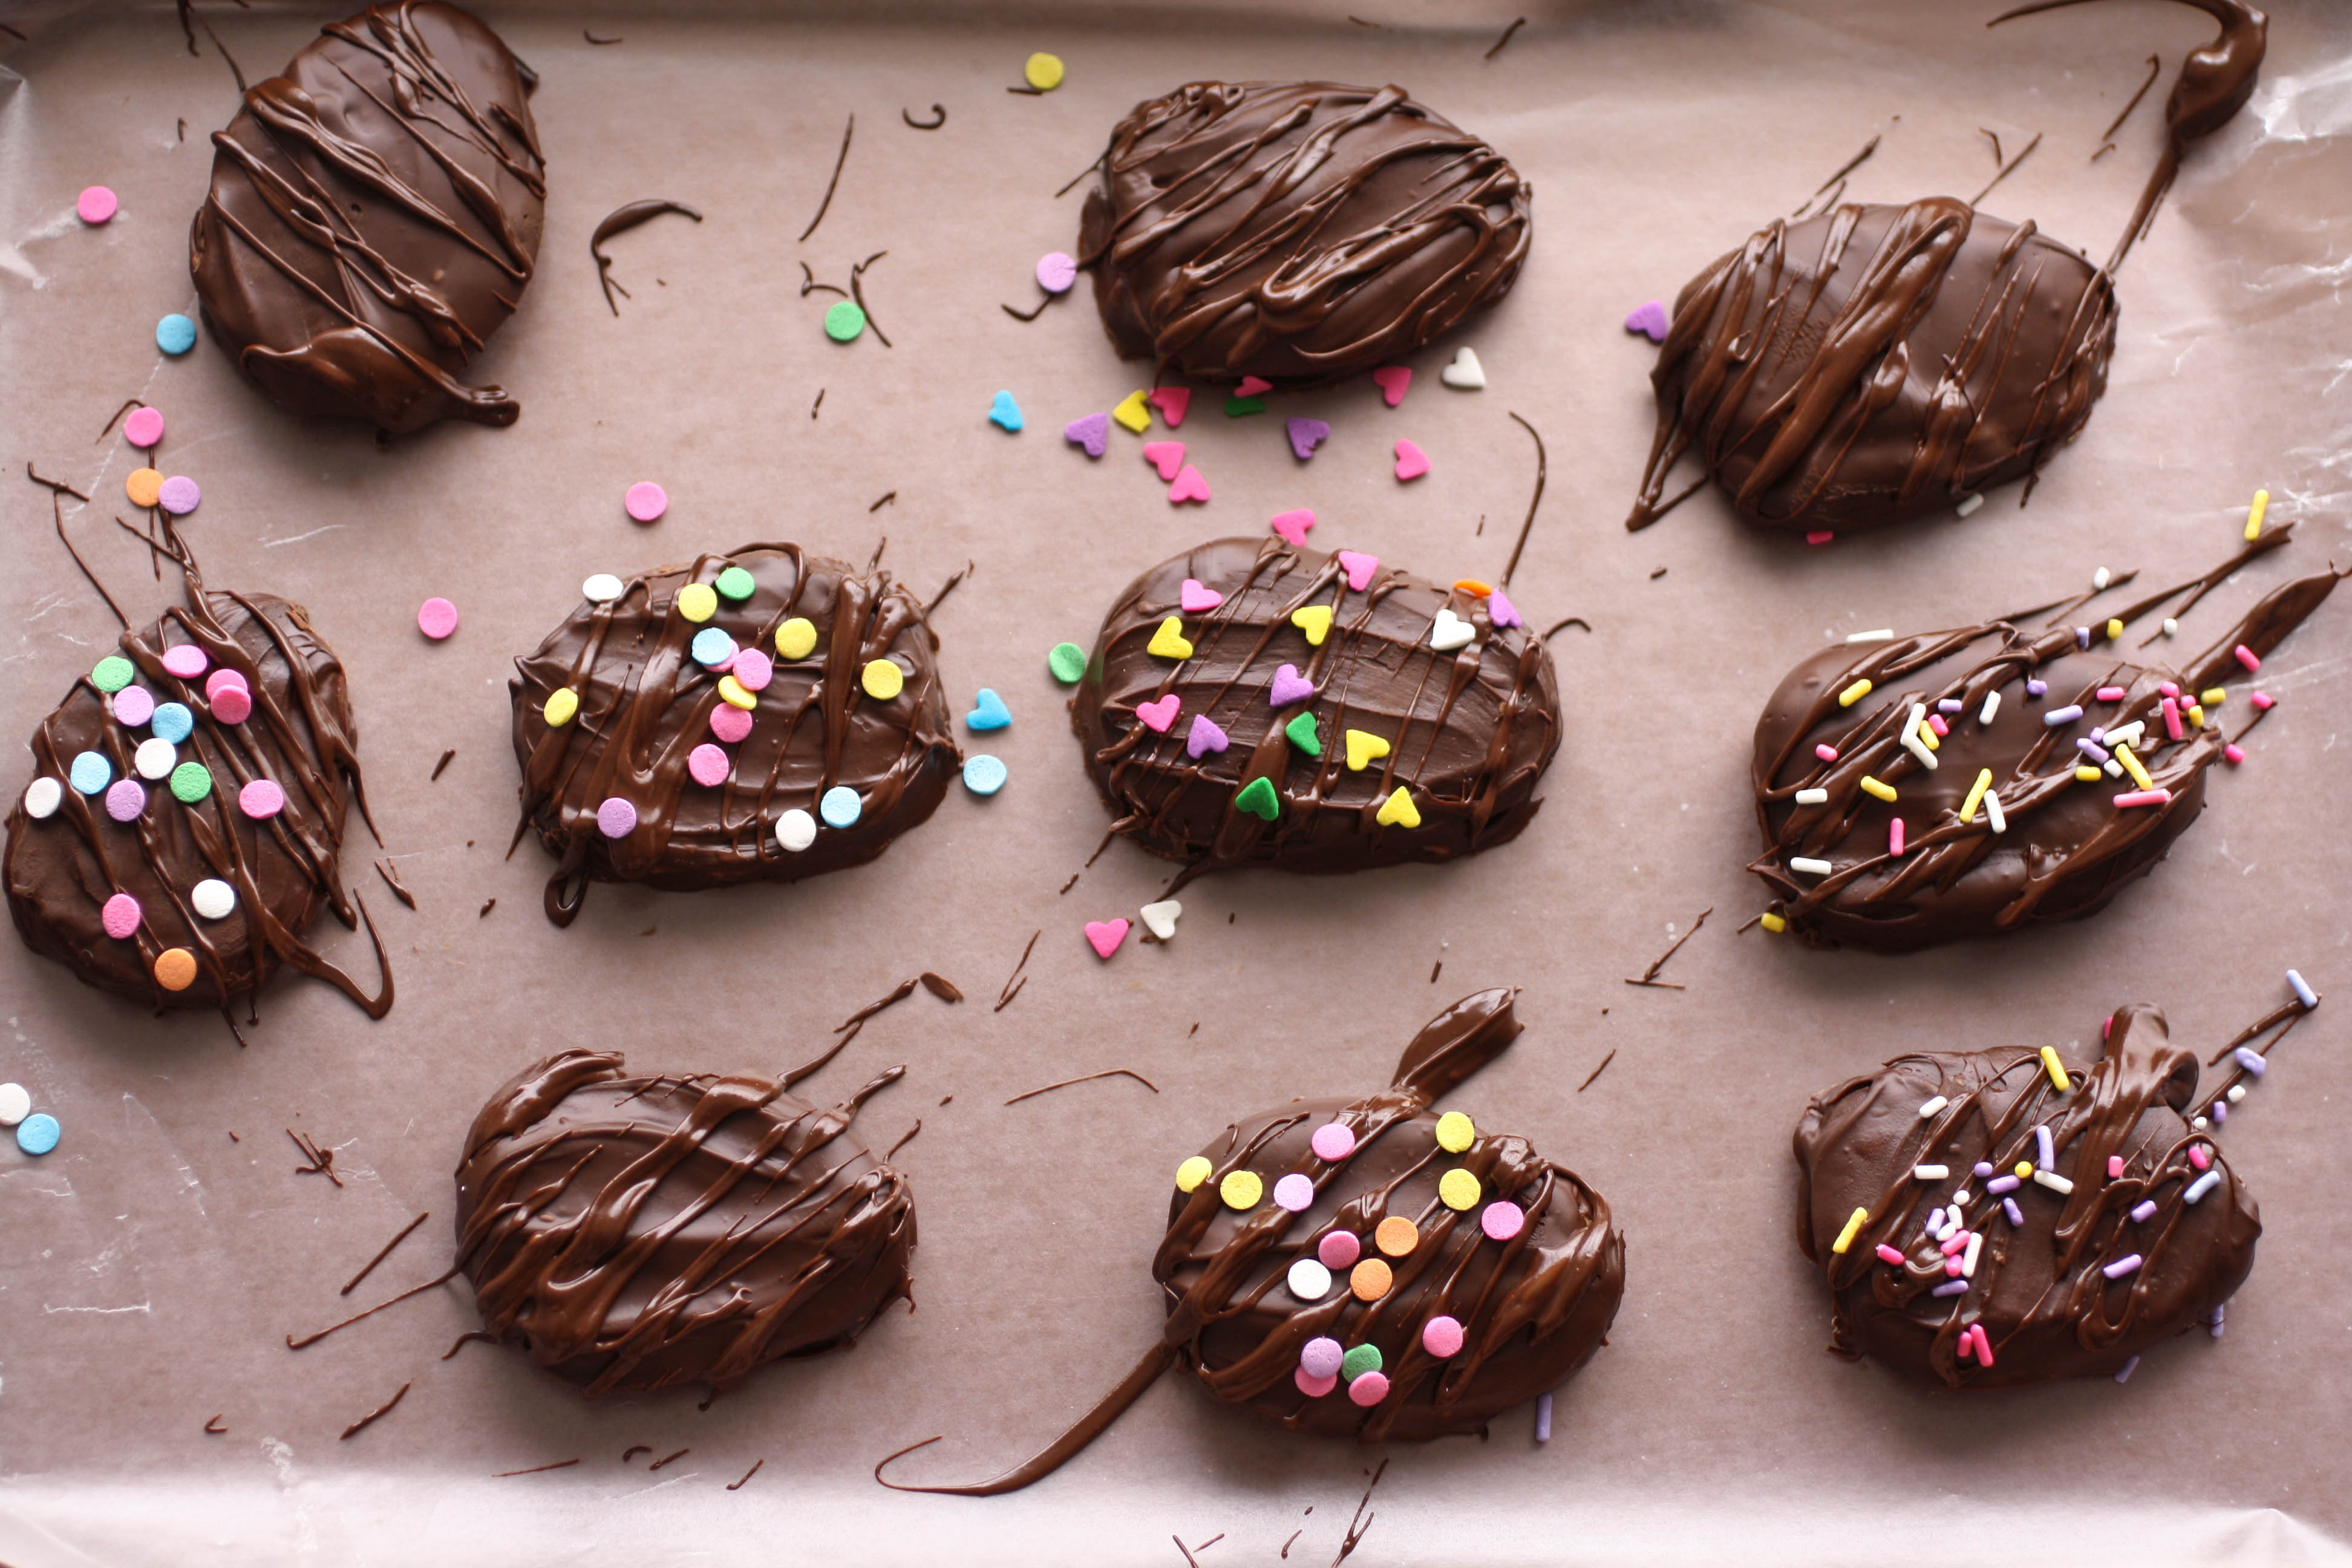 Peanut Butter-Toffee Chocolate Eggs are a fun, seasonal treat to make. They're just in time for Easter!